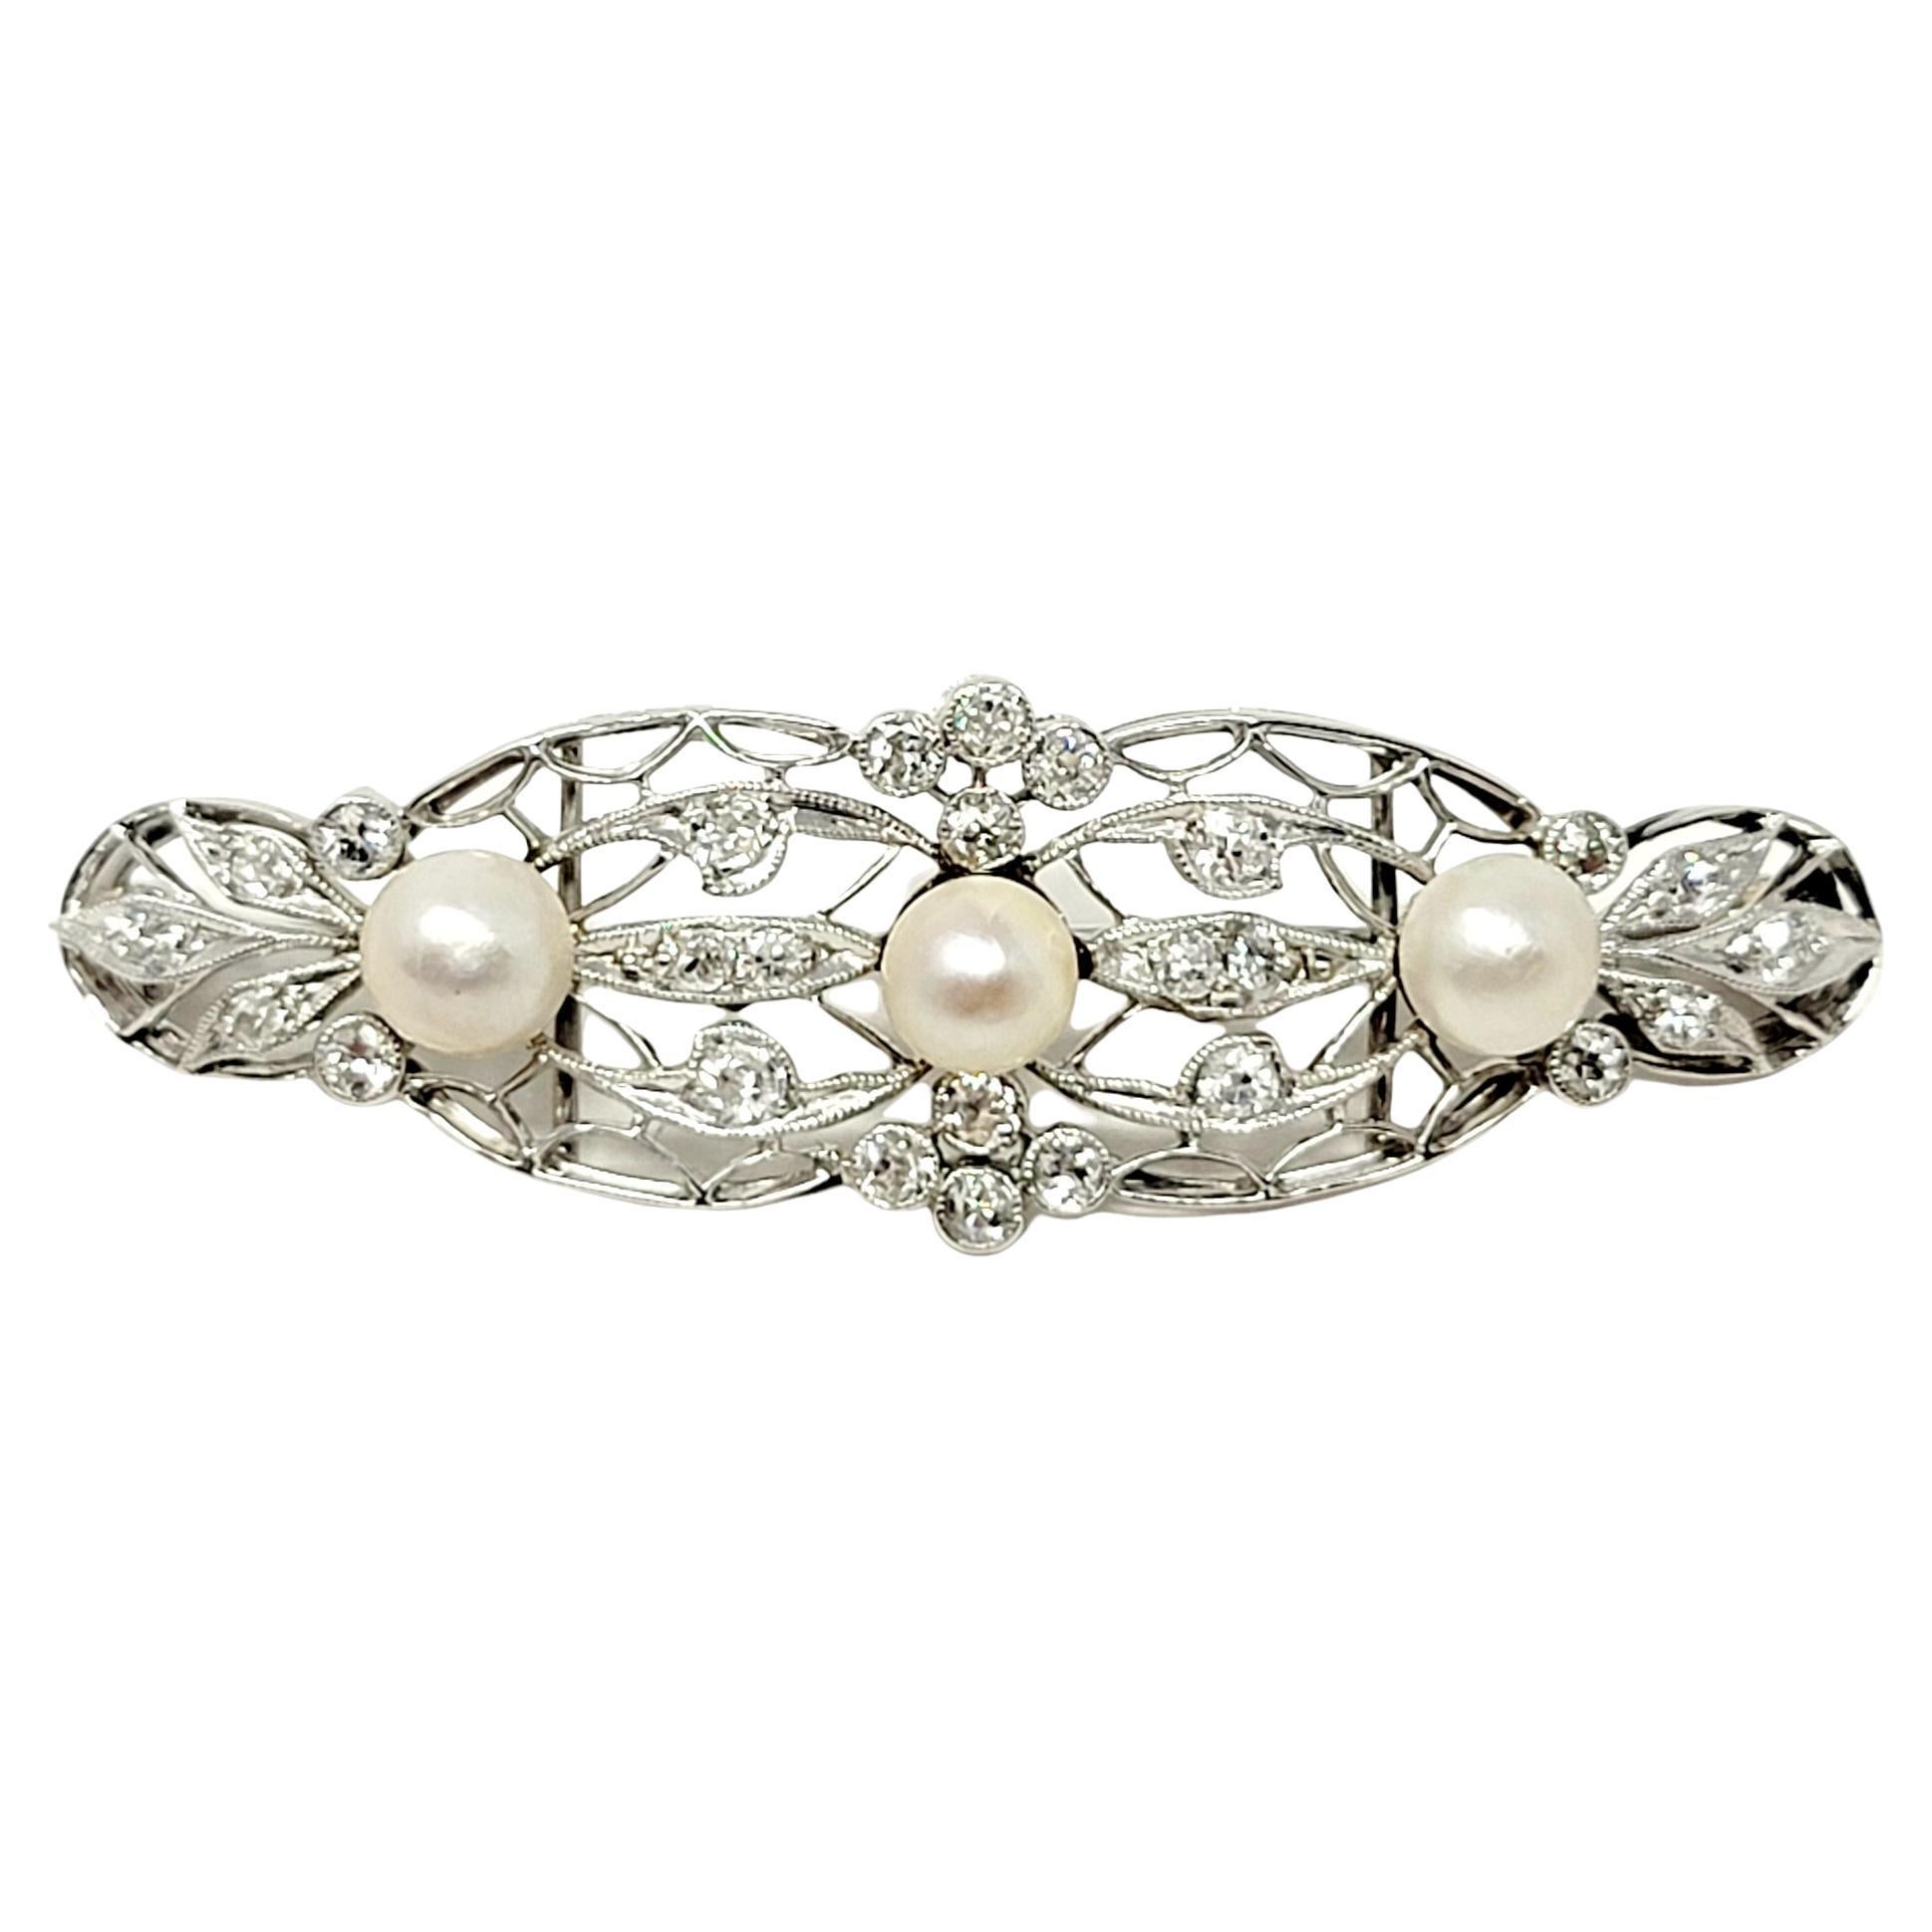 Vintage Edwardian Style Diamond and Pearl Filigree Brooch 14 Karat White Gold For Sale